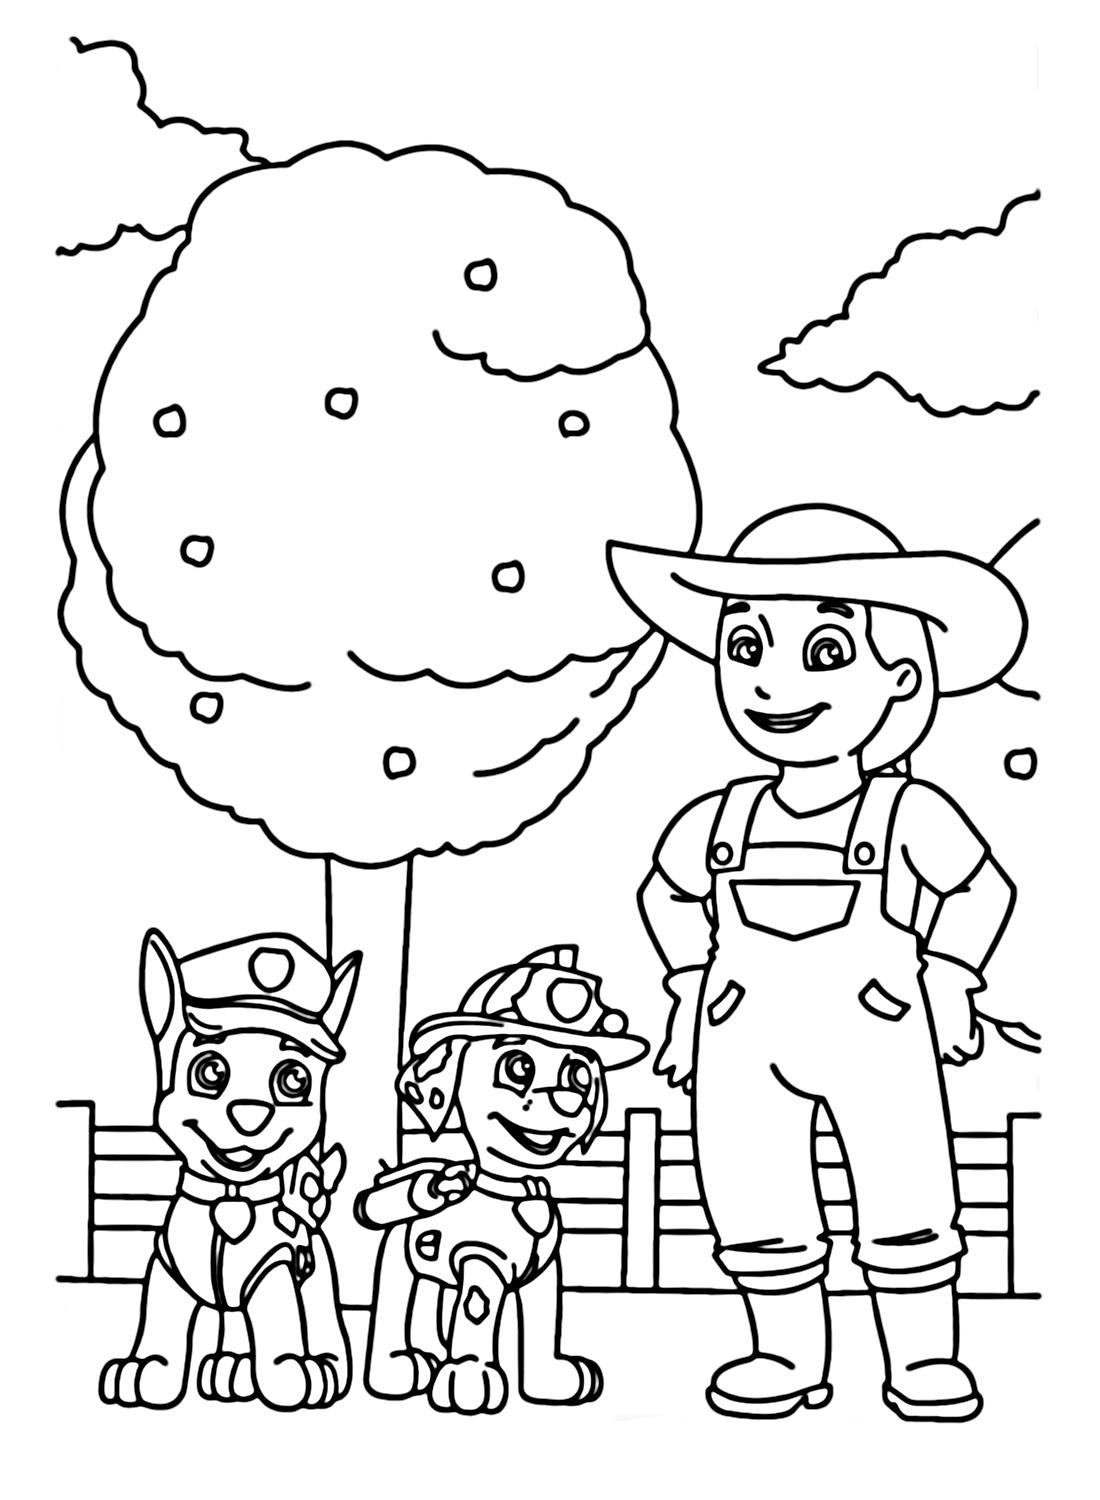 Paw Patrol 6 Coloring Pages